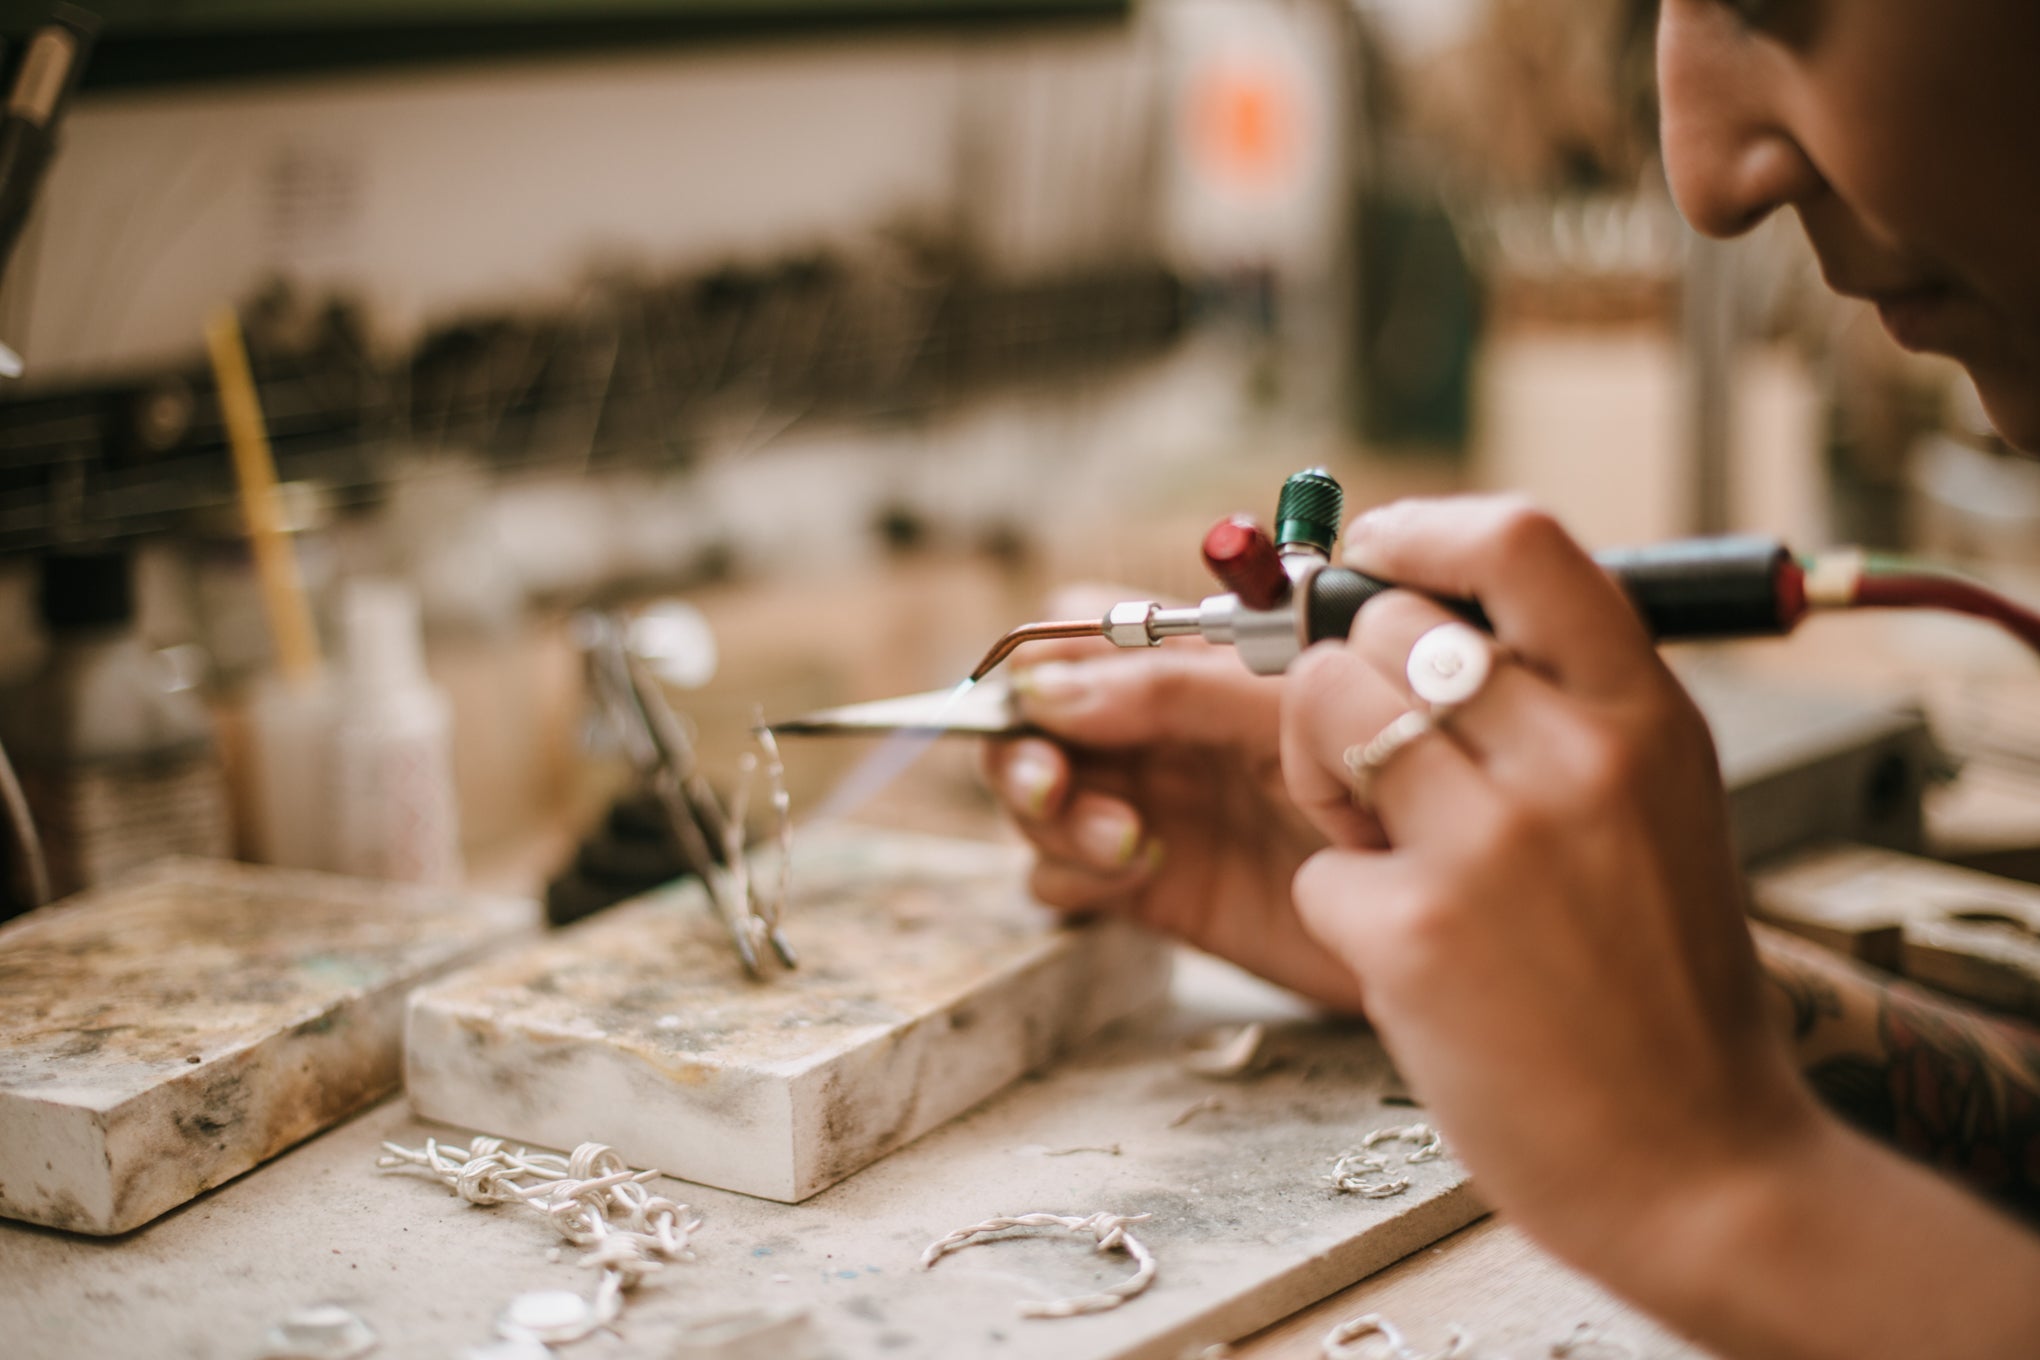 Independent jeweller making a pair of earrings at her workbench